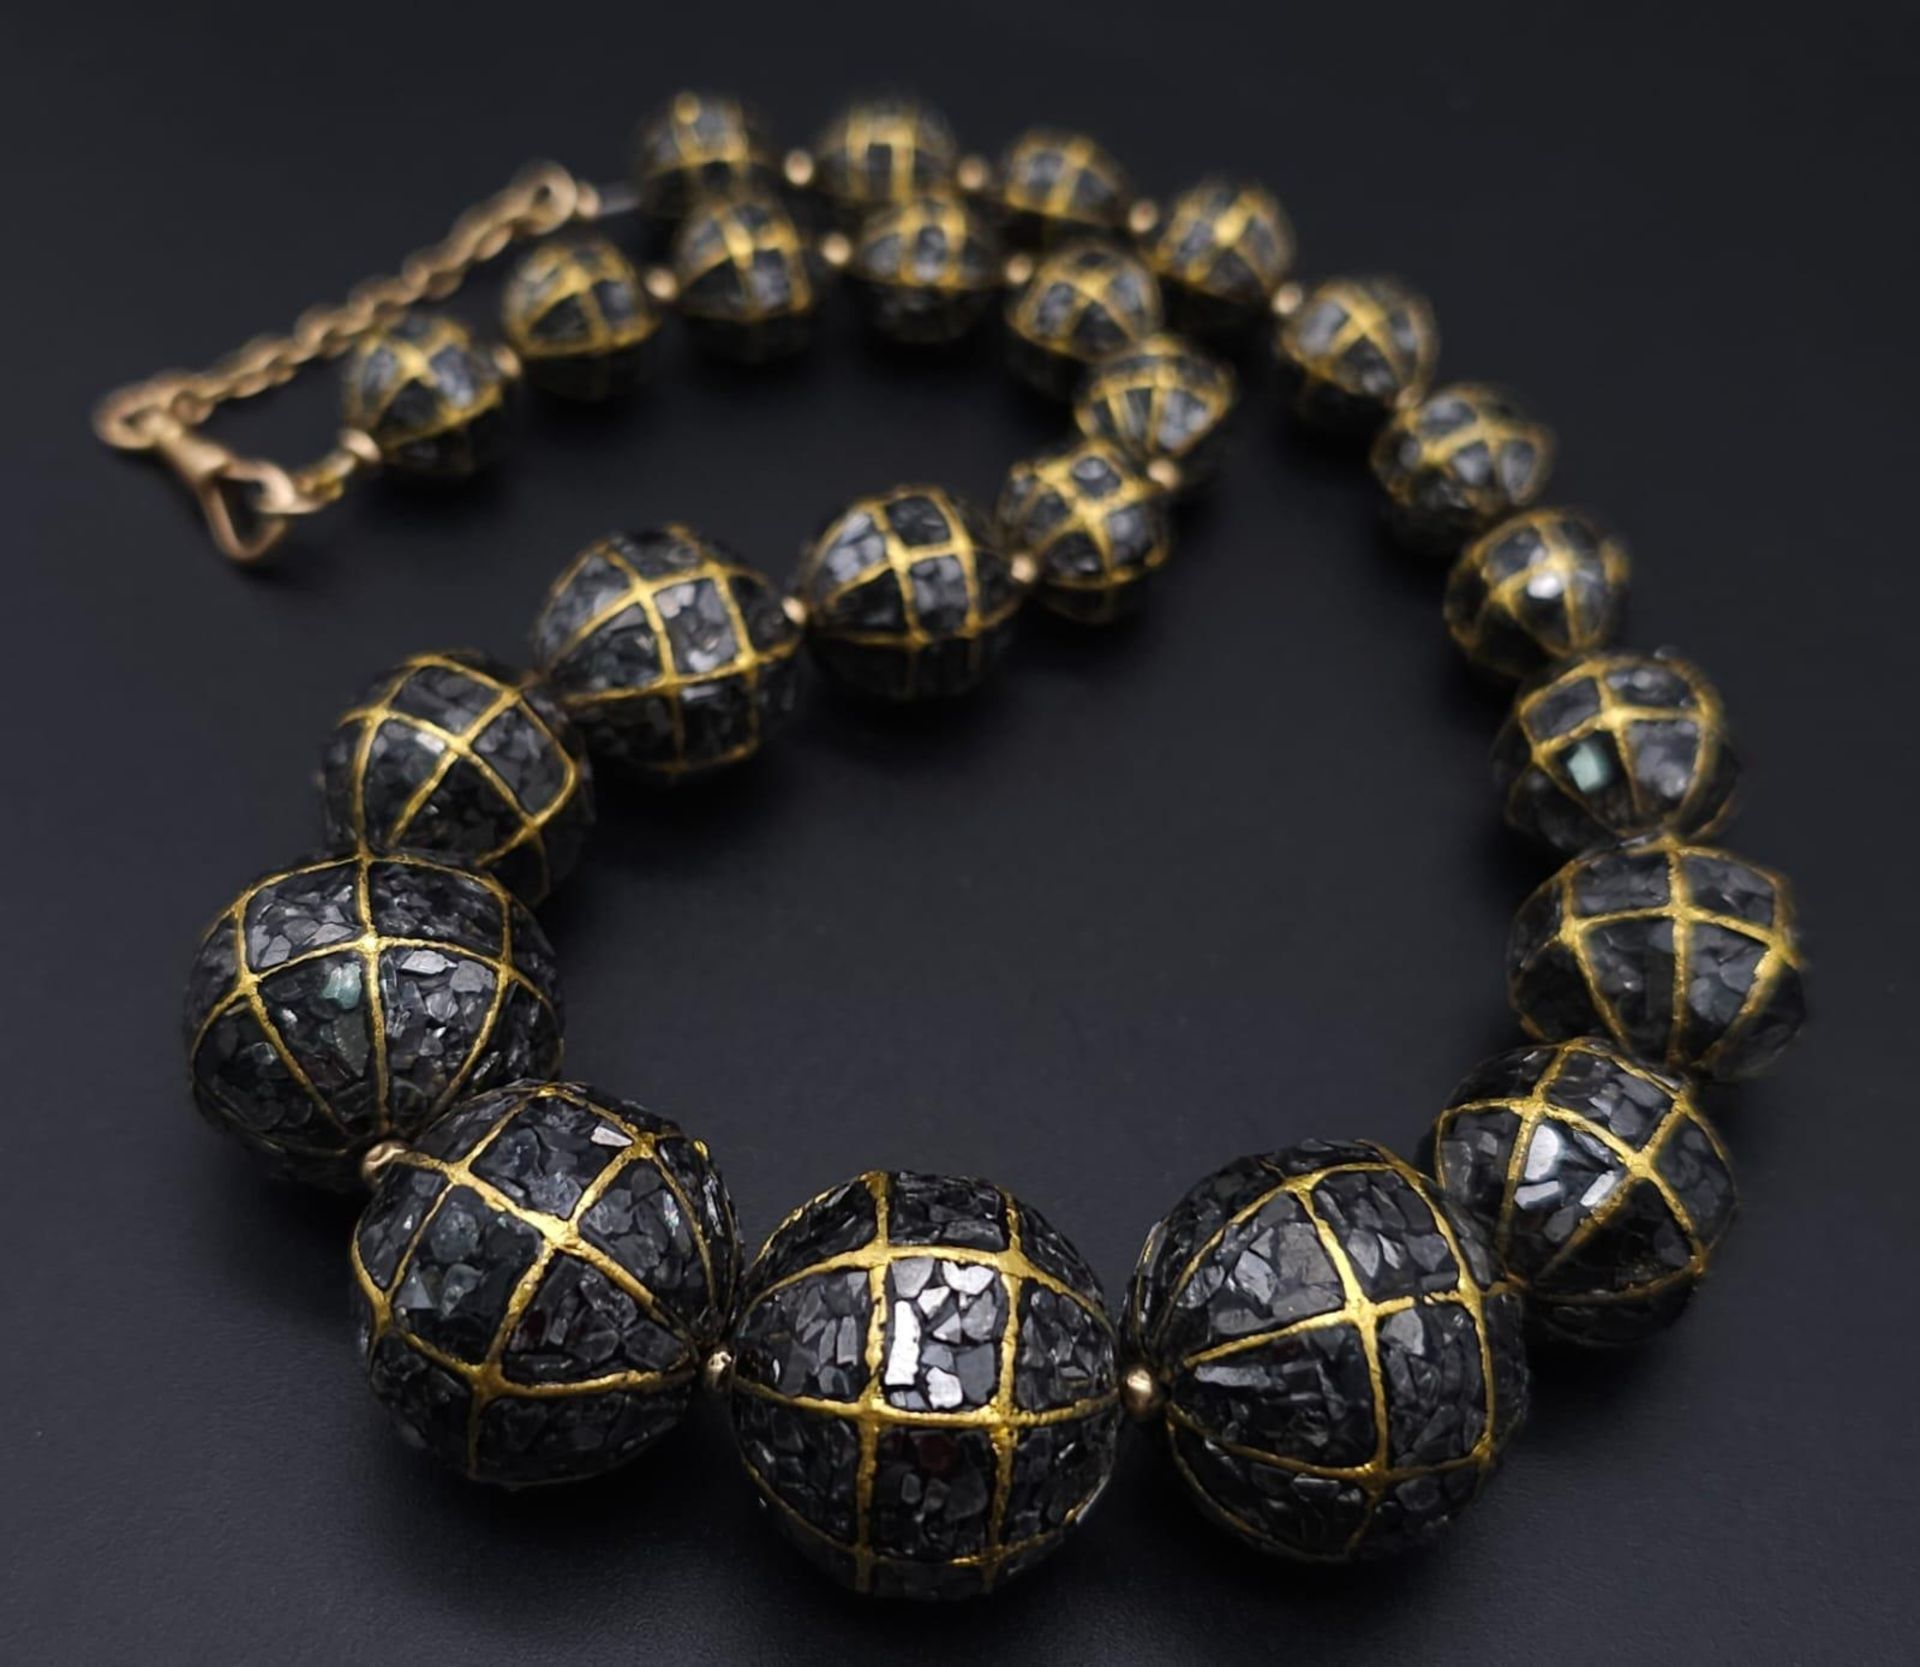 An Antique 18K Rose Gold and Diamond Encrusted Ball Necklace. Graduating golden balls filled with - Image 8 of 10